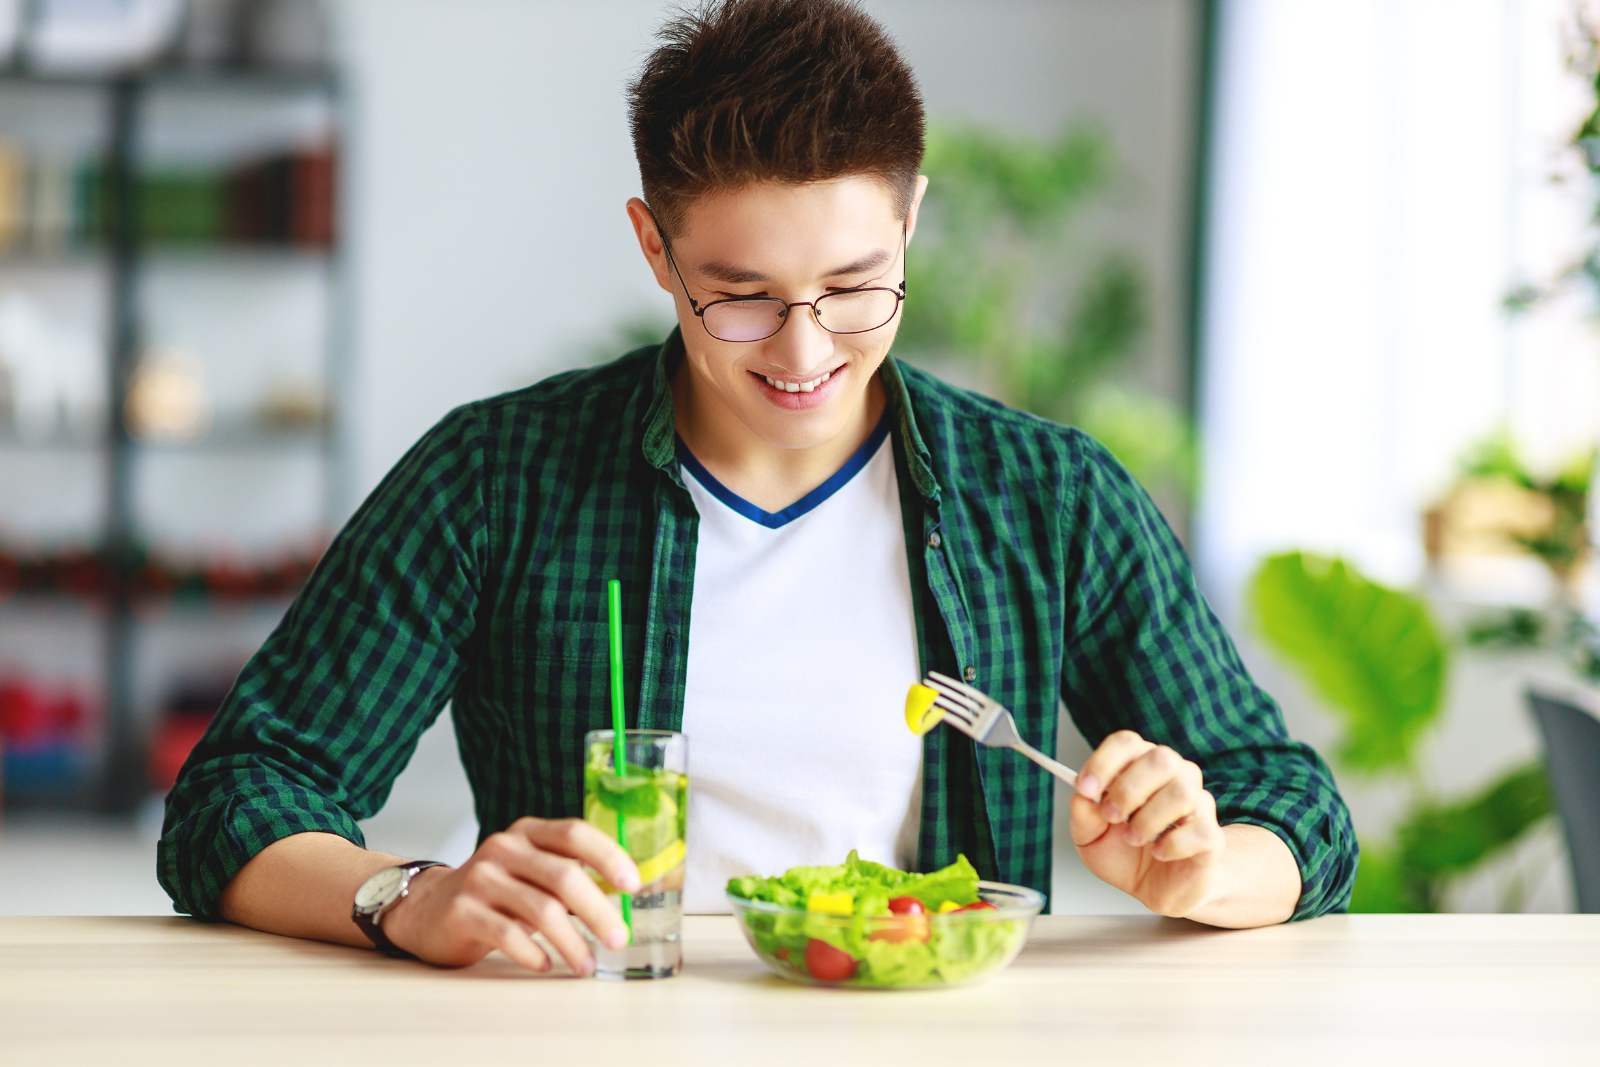 man with eating disorder getting nutrition from salad